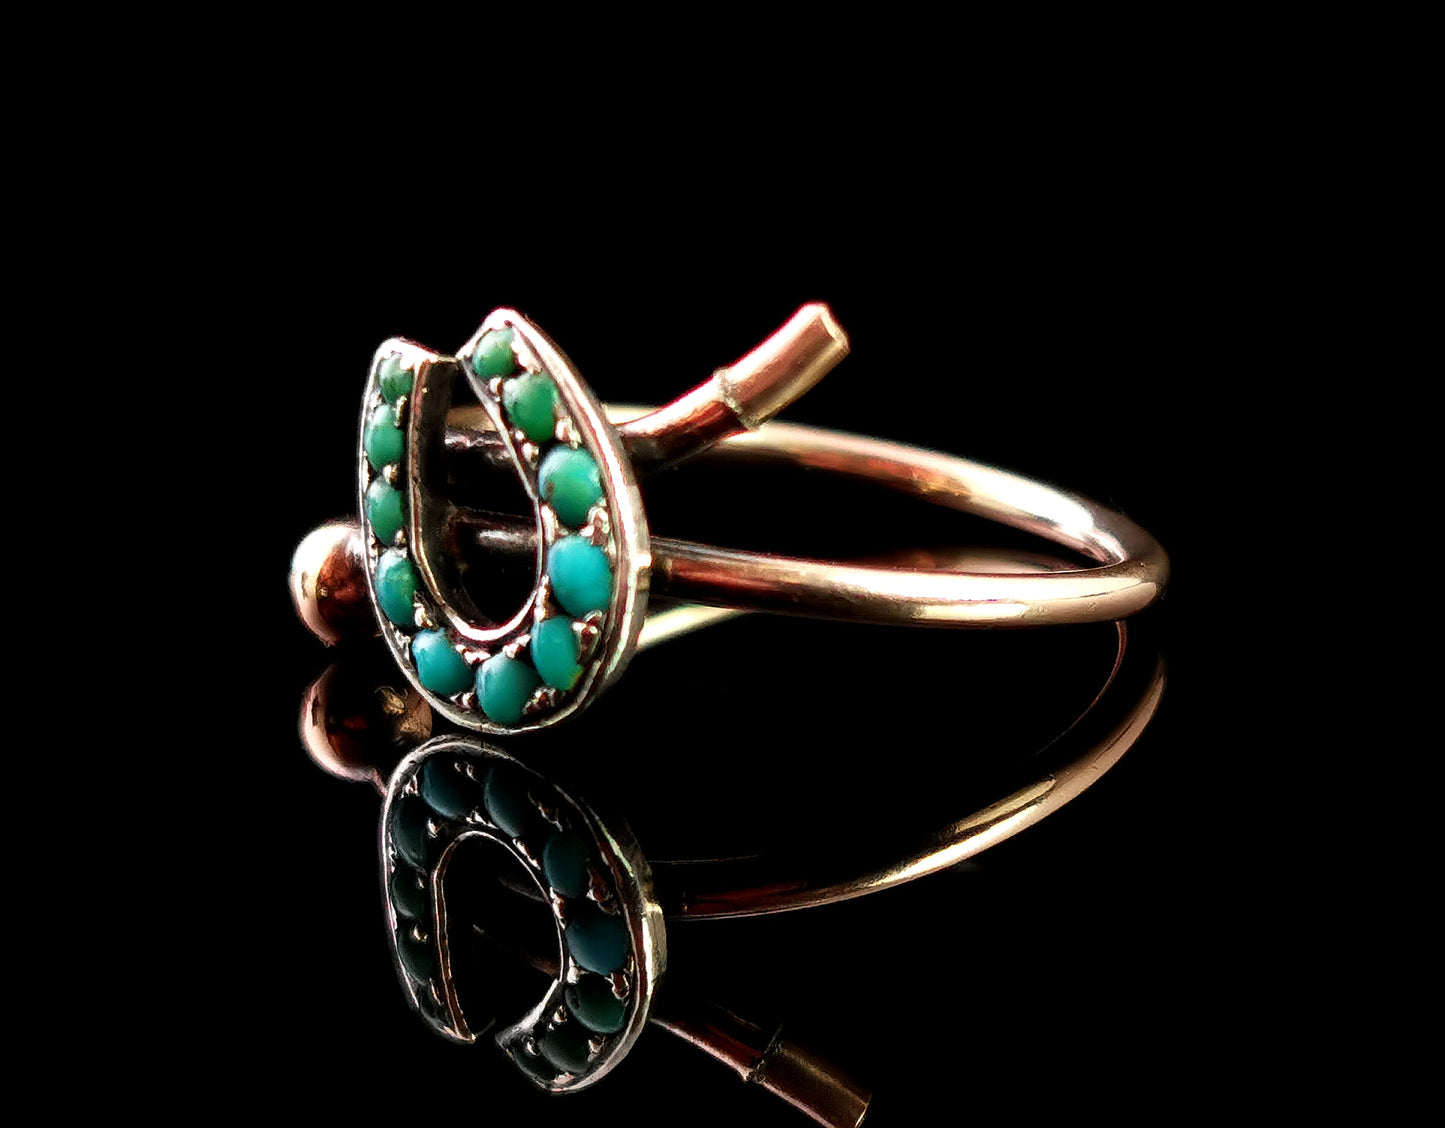 Antique Turquoise horseshoe and crop ring, 9ct Rose gold and sterling silver